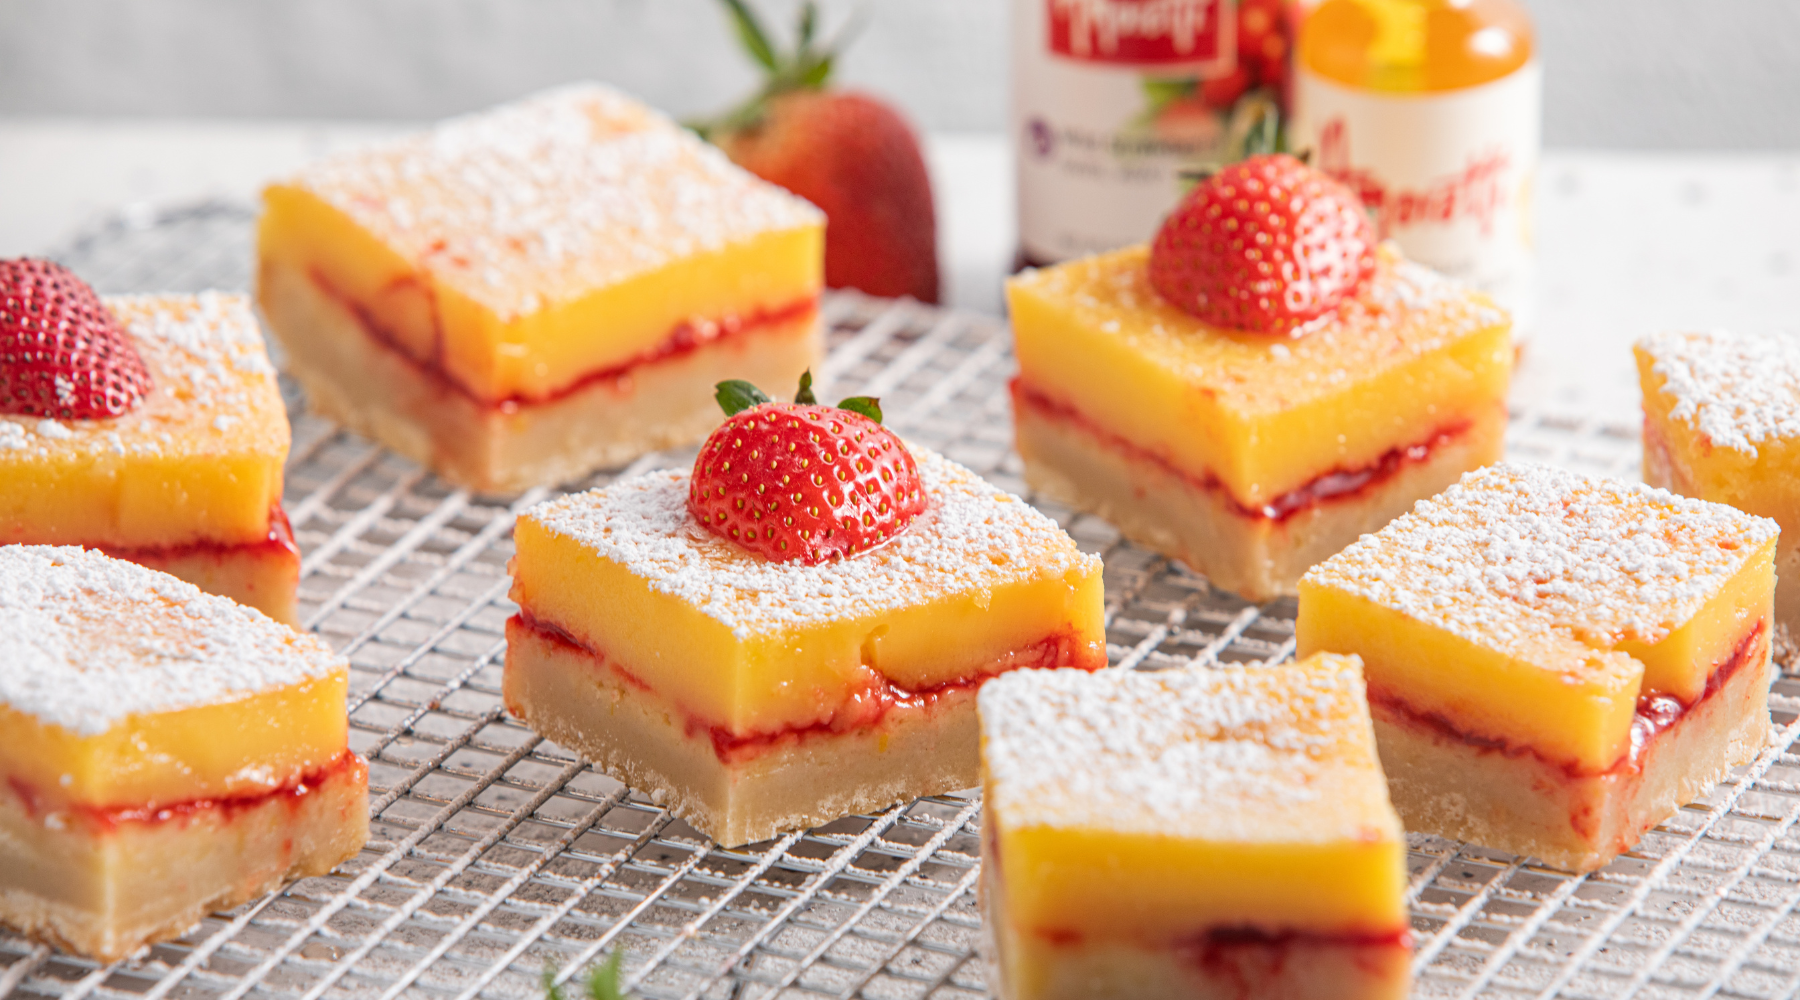 Strawberry Lemon Bars topped with powdered sugar and strawberries